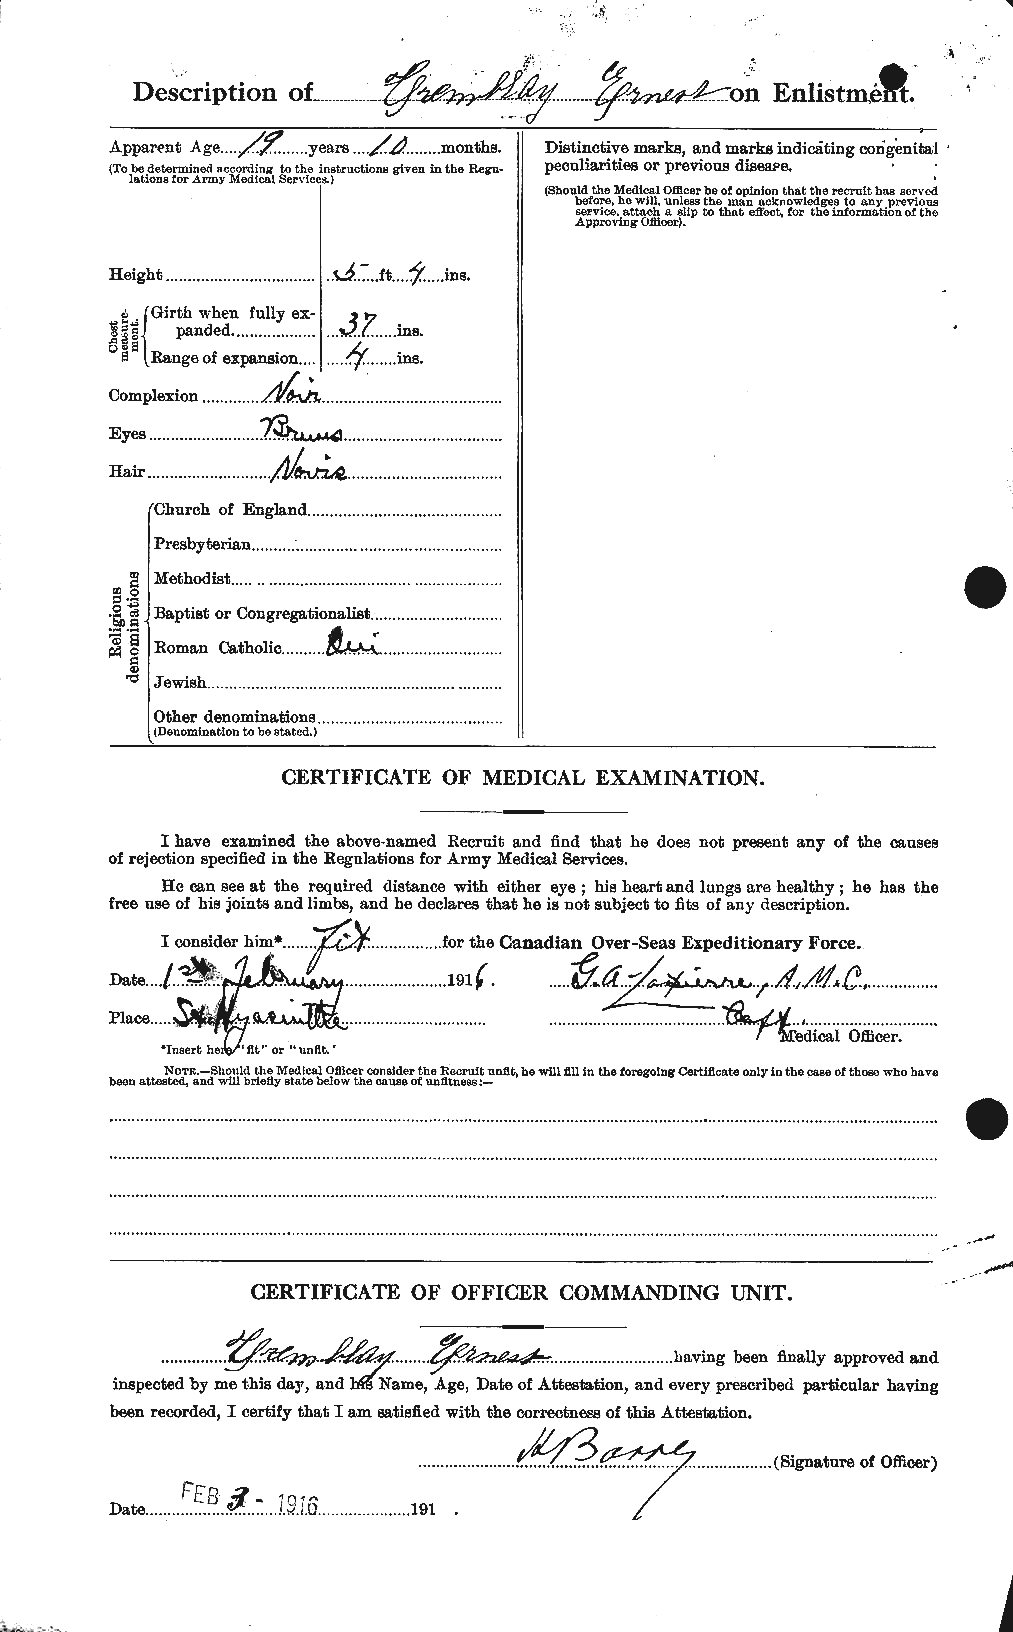 Personnel Records of the First World War - CEF 639029b